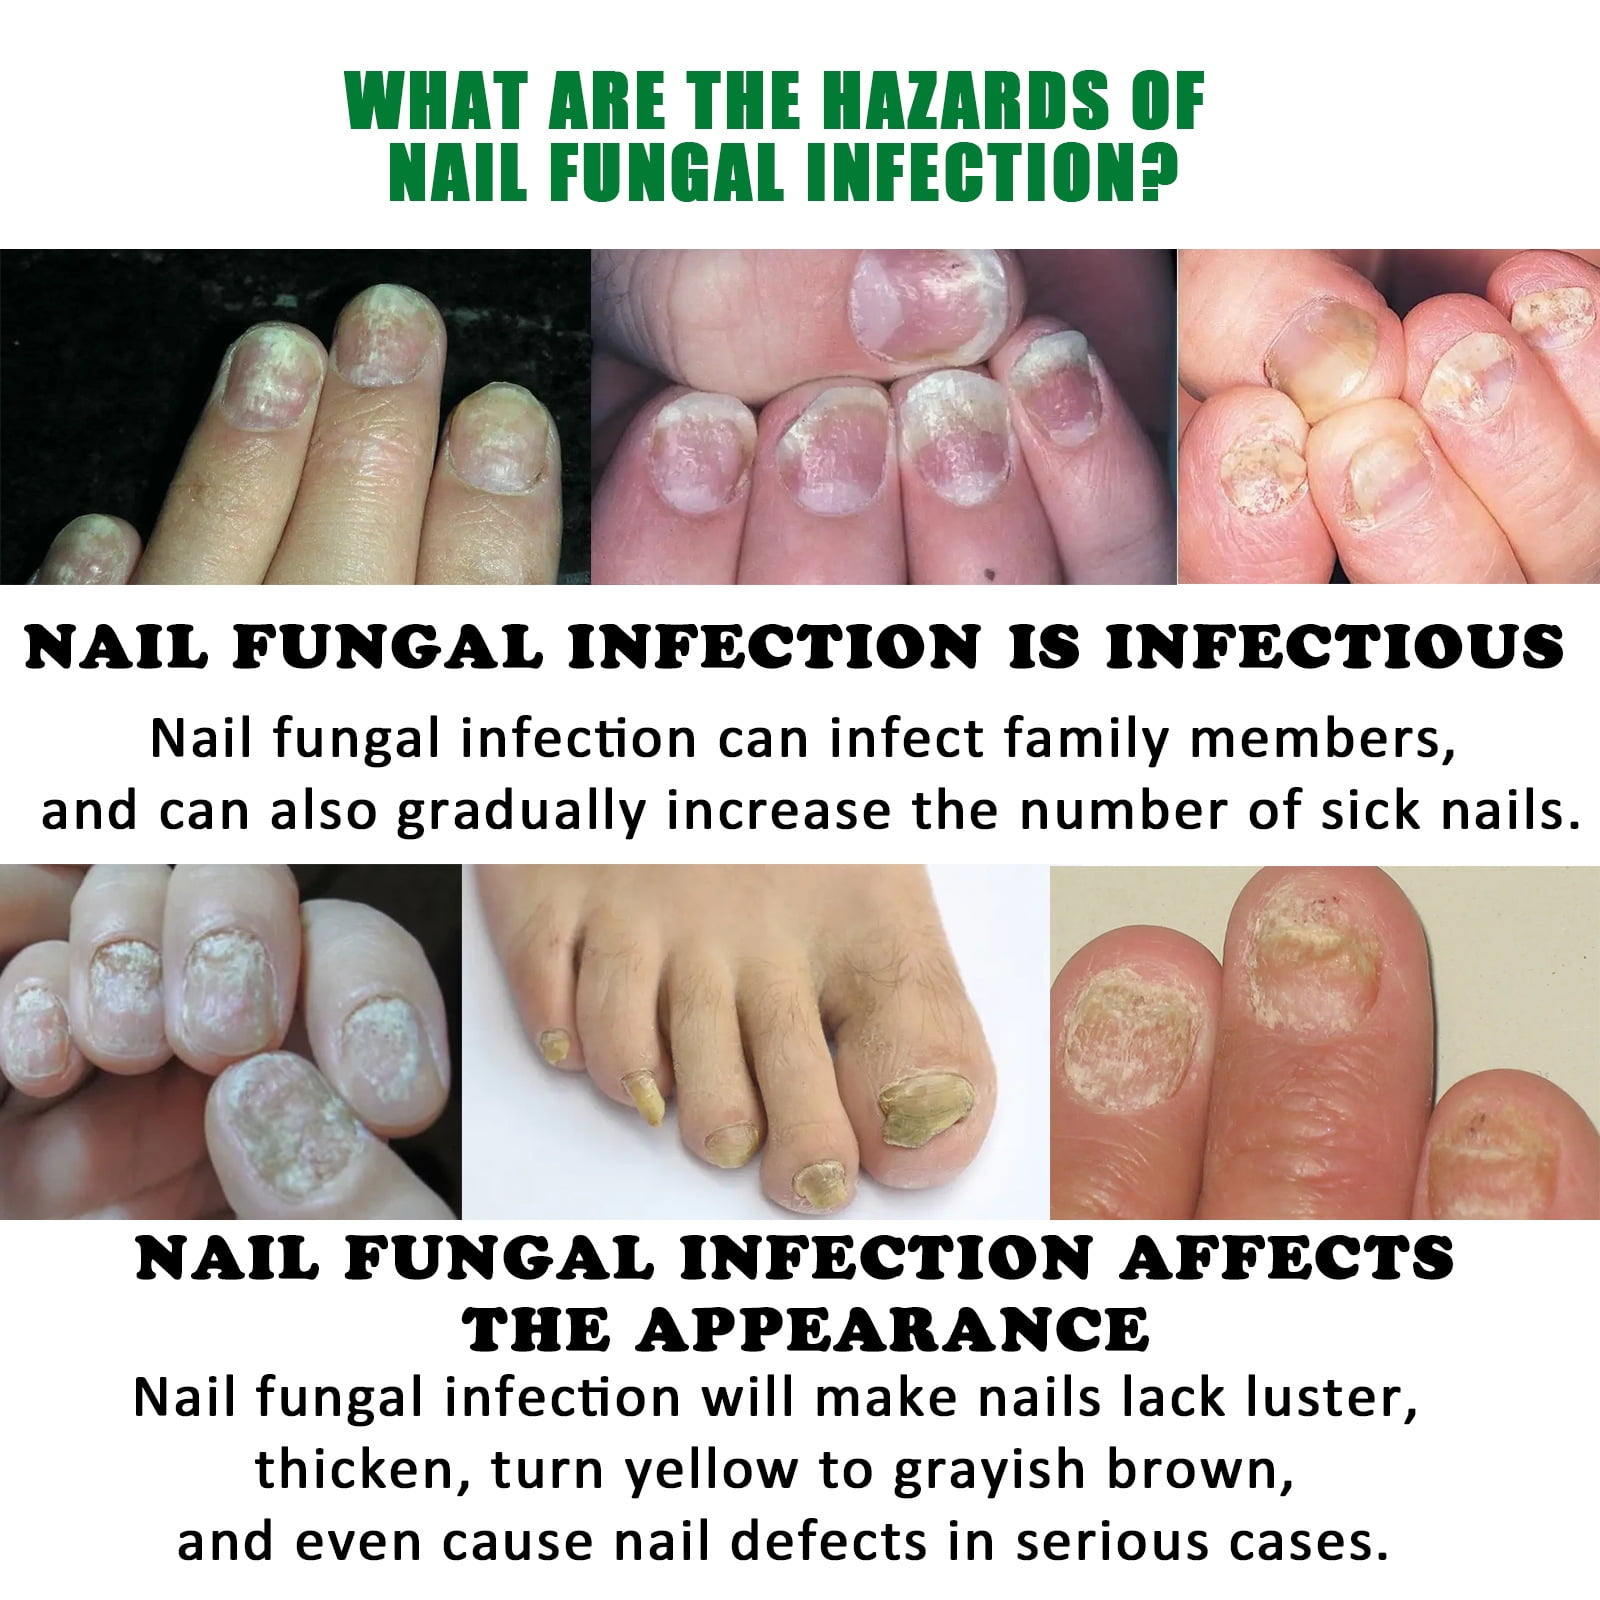 Brittle Nails: Causes, Symptoms, Treatment and Home Remedies | Femina.in